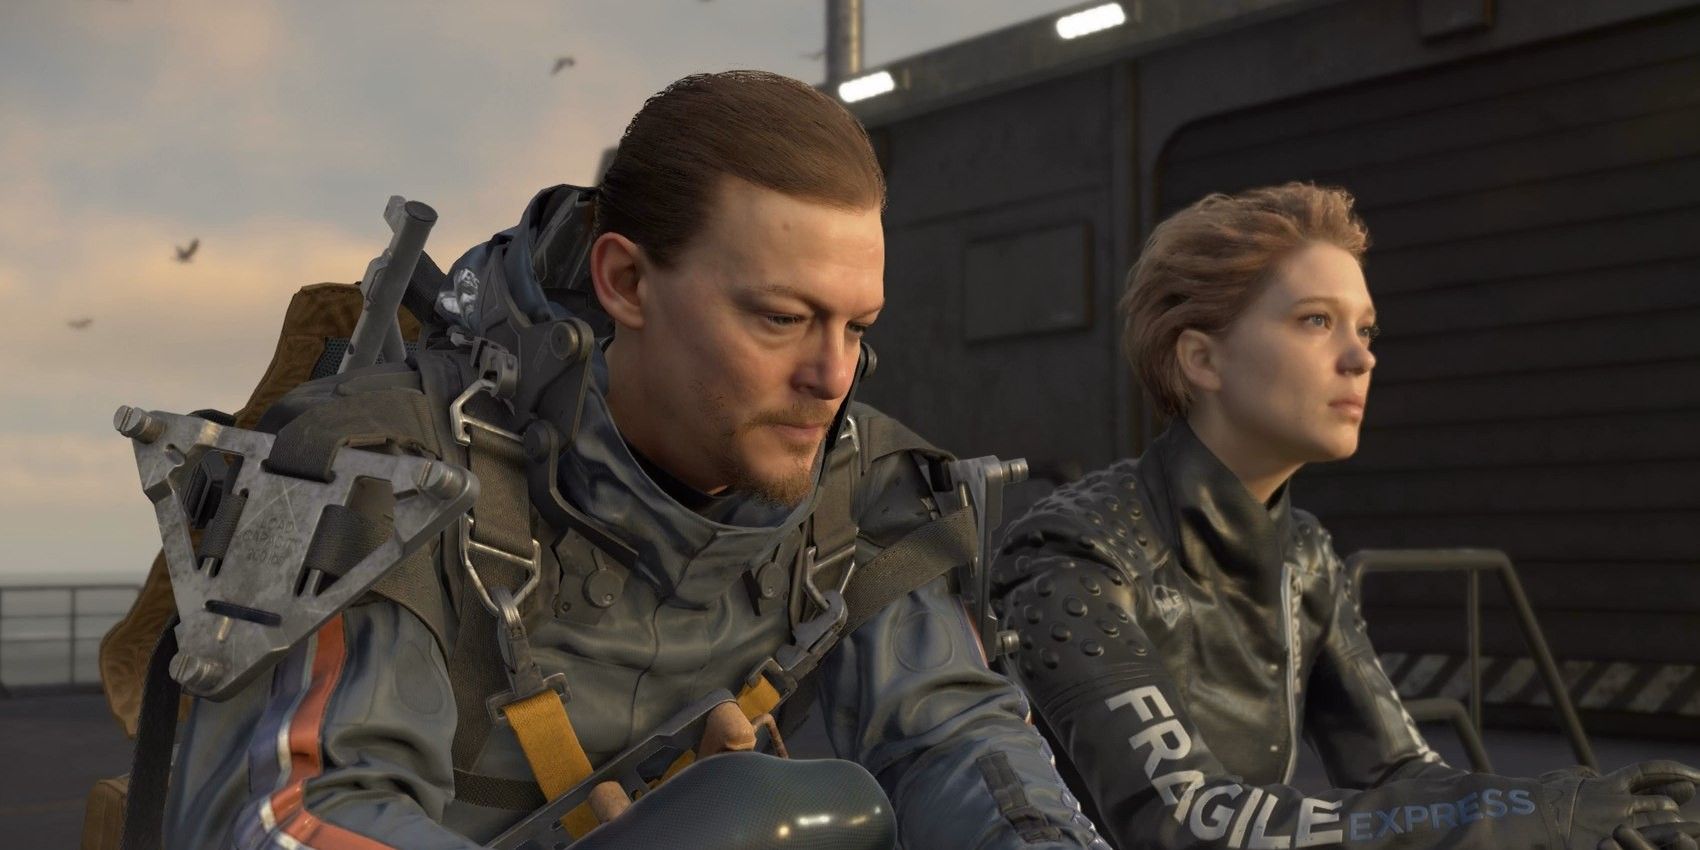 Fans of Death Stranding's Supporting Cast May Be Out of Luck With DS2